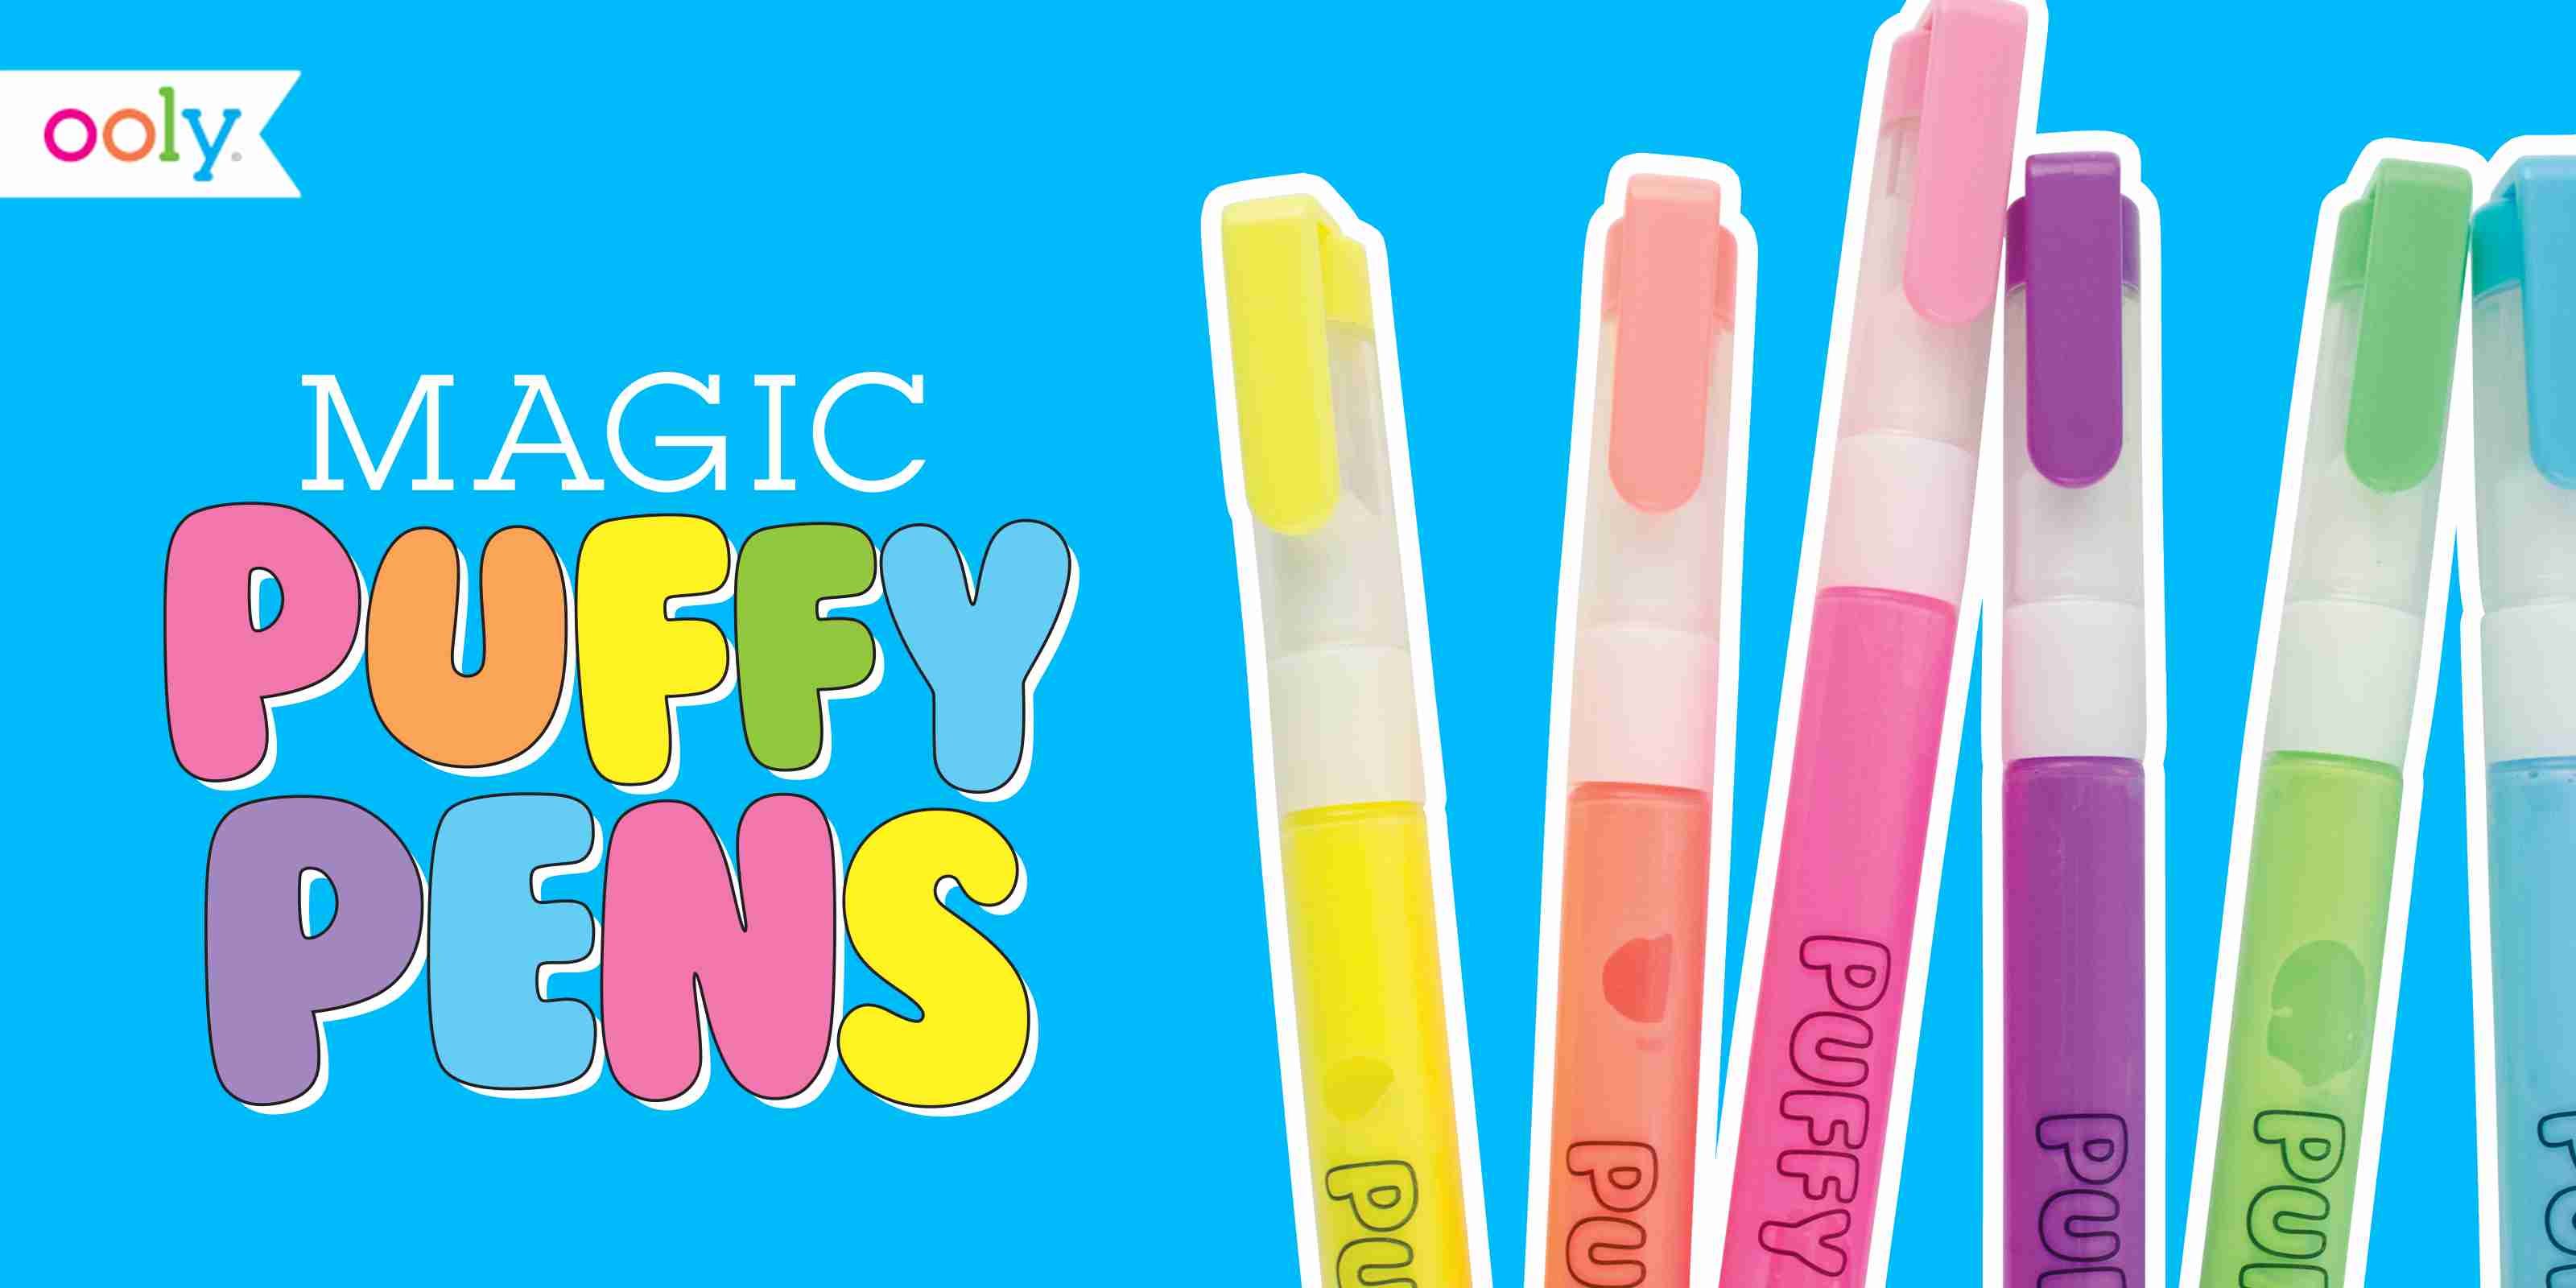 Magic Puffy Pens  Magic pens that puff up! Check out 5 ways to